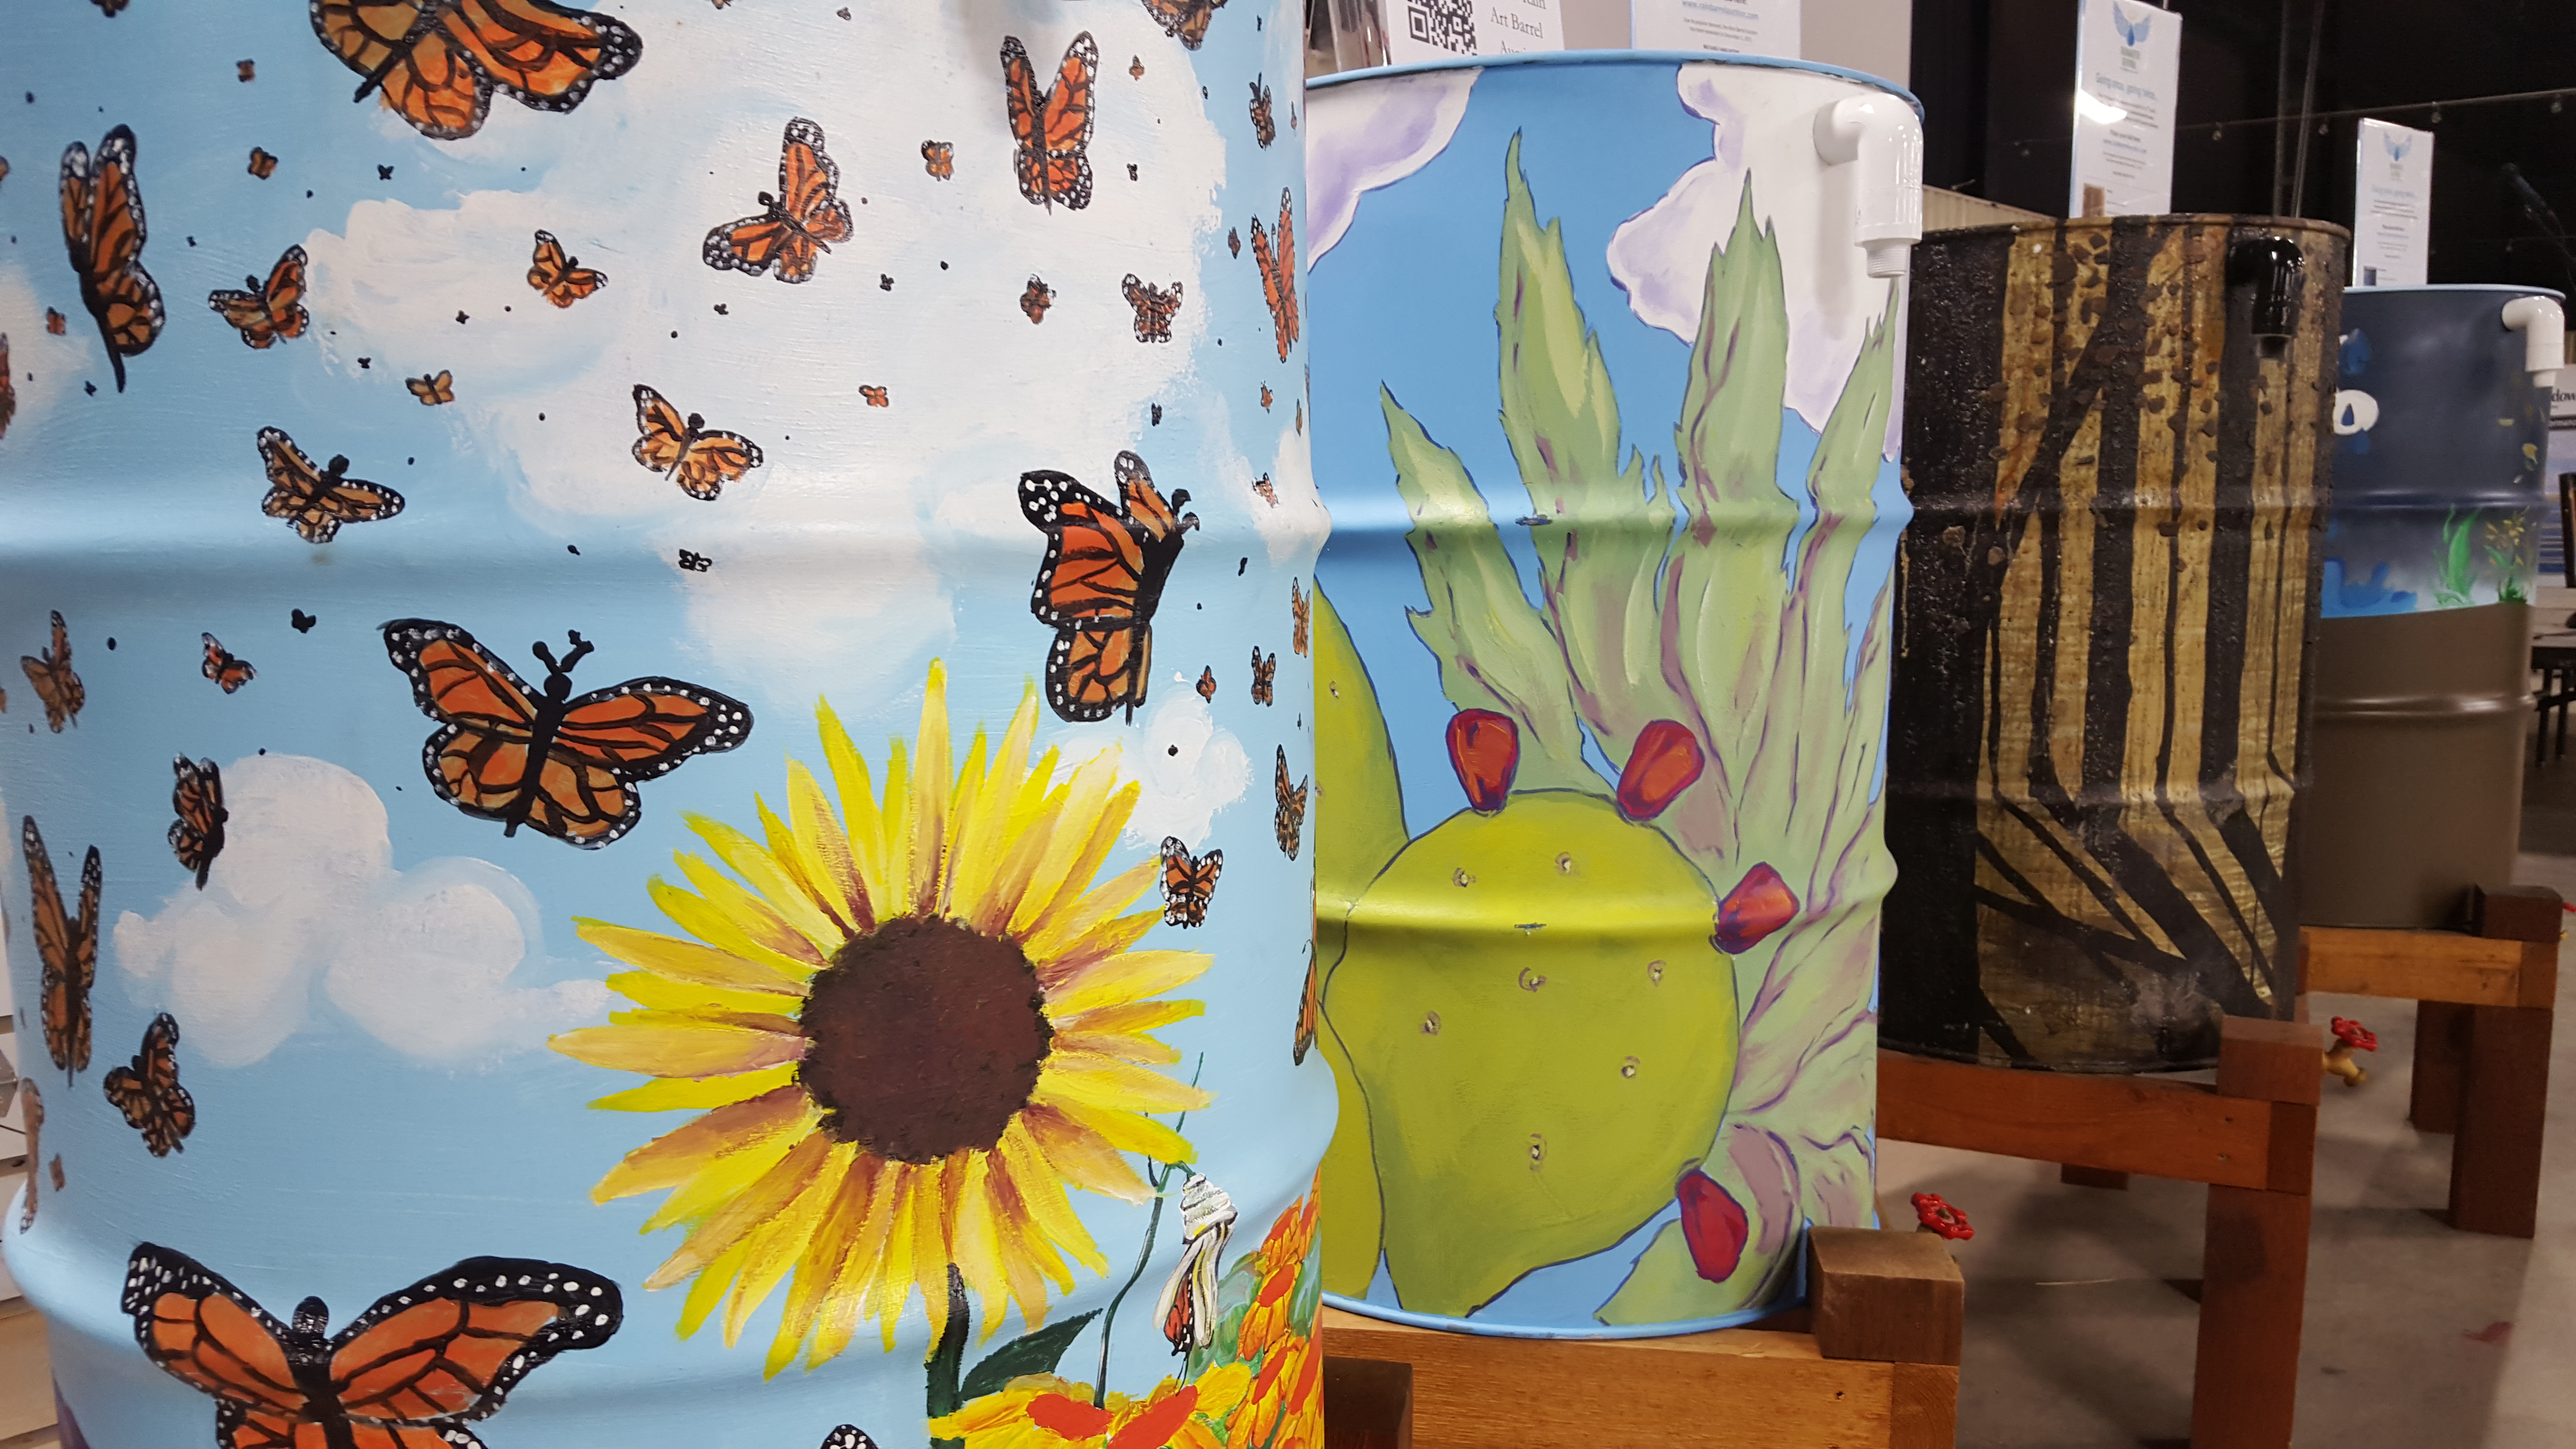 The Rain Barrel Art Auction has been extended to December 1